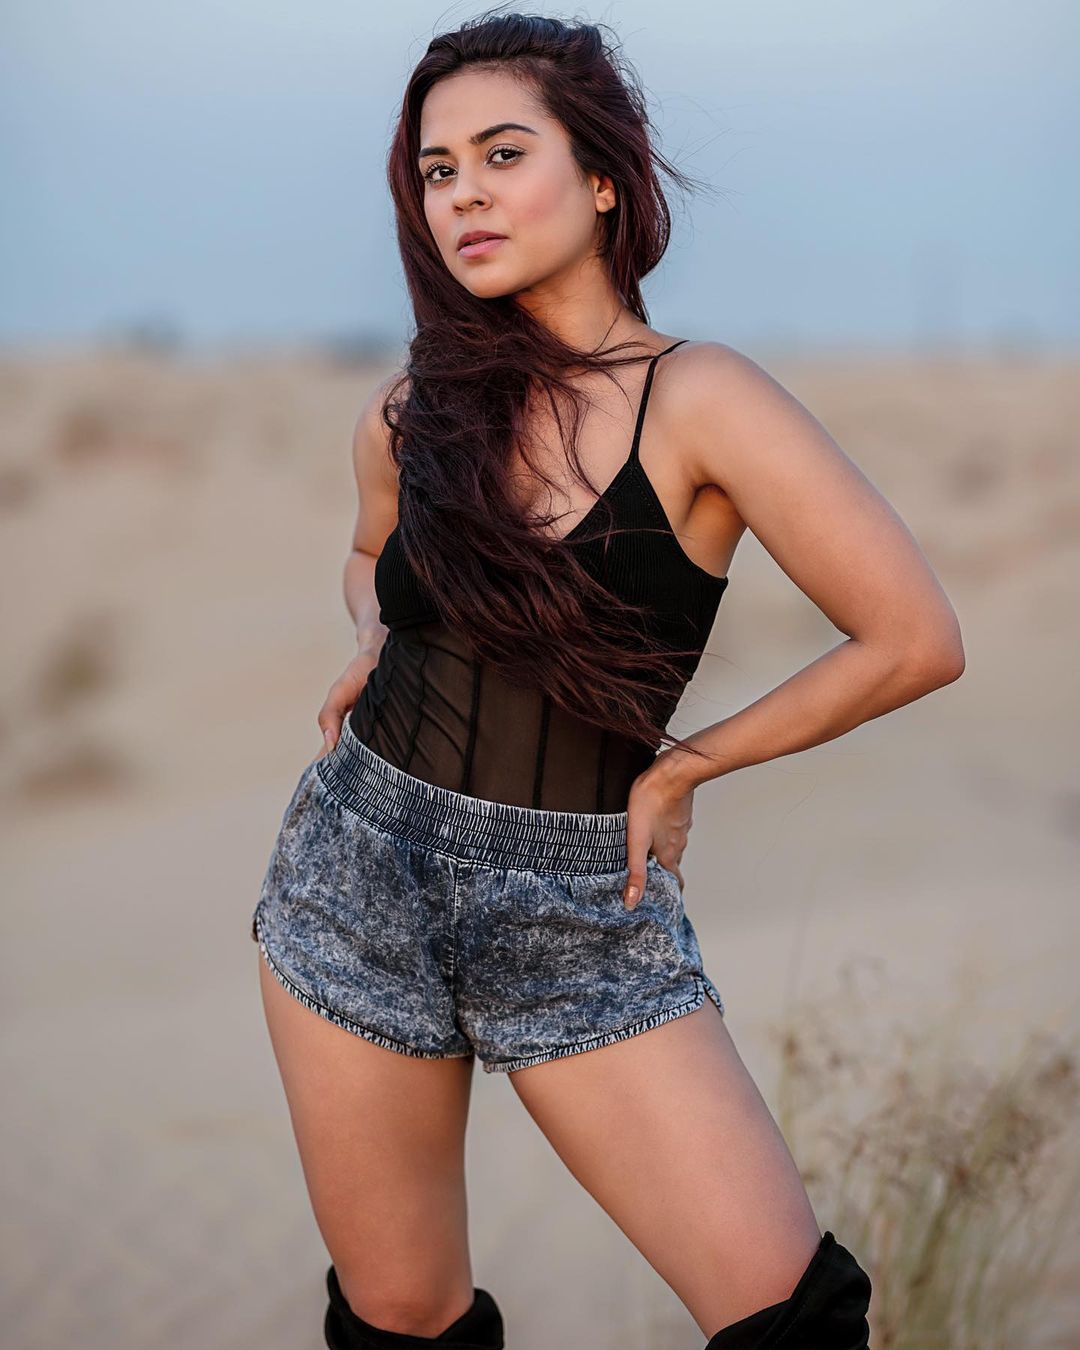 Sana Saeed rocks it in the black spagetti-strap top and denim shorts.